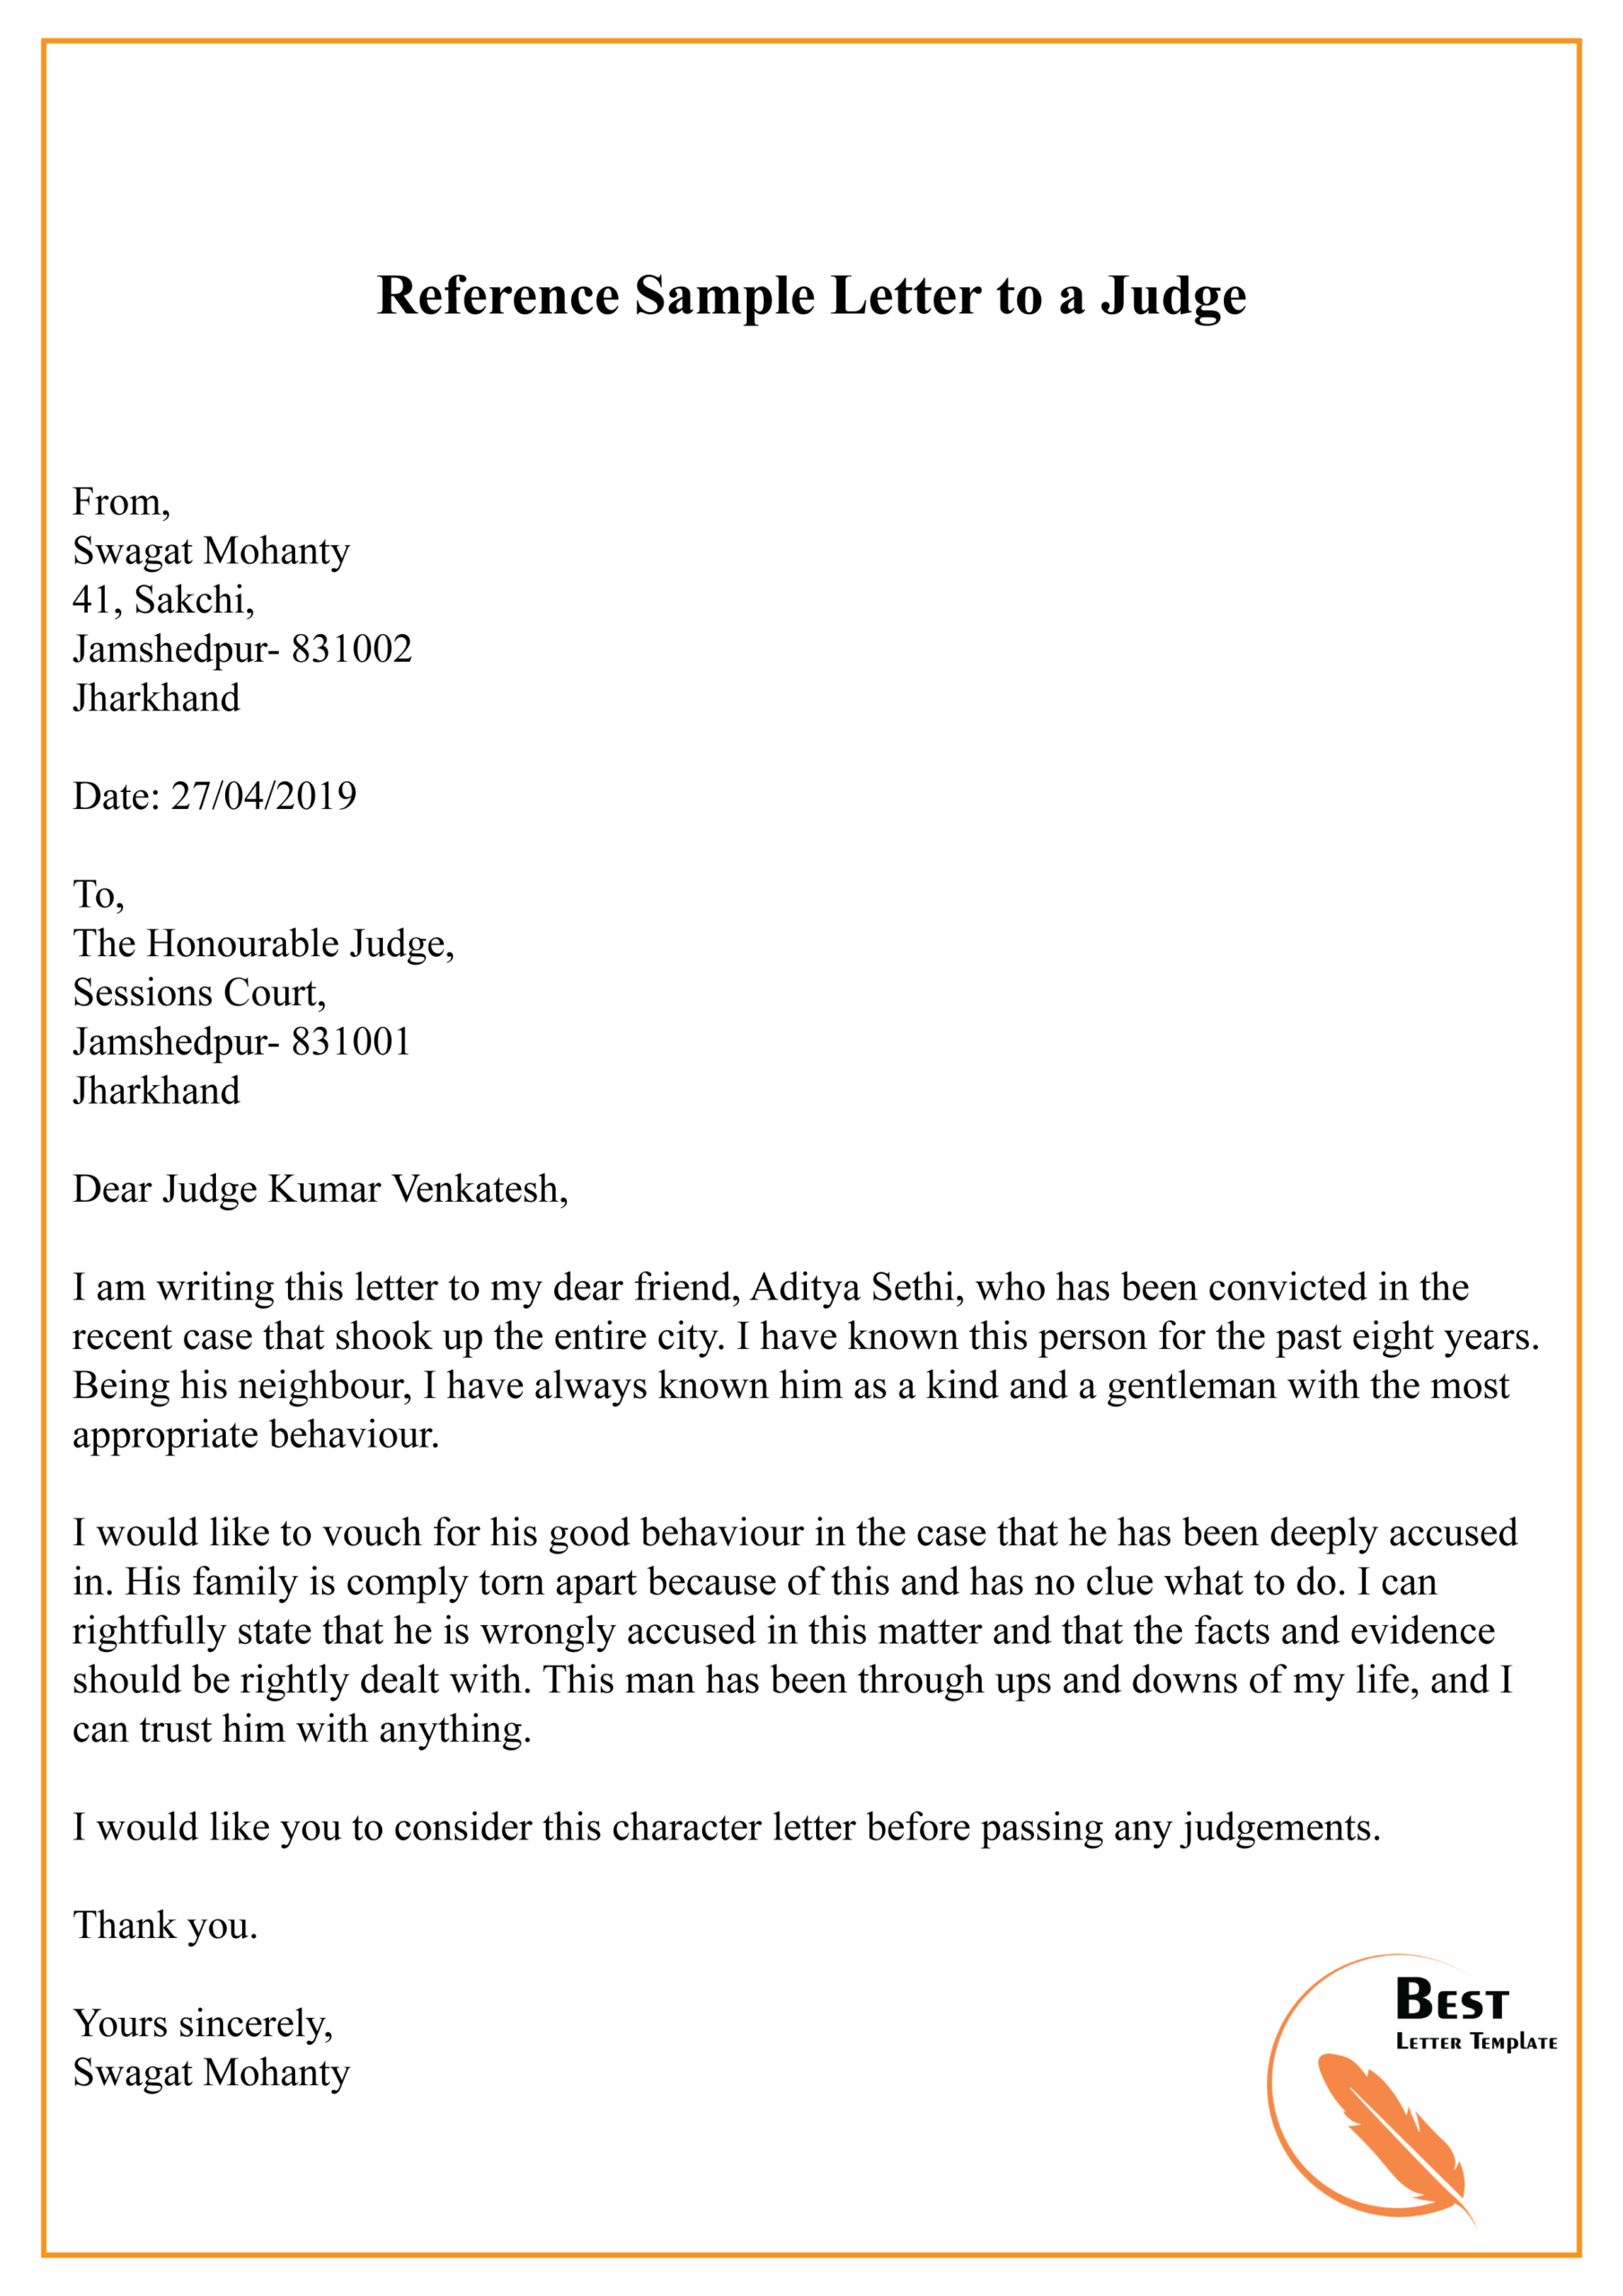 Reference Sample Letter To A Judge 01 | Best Letter Template Inside How To Write A Letter To A Judge Template